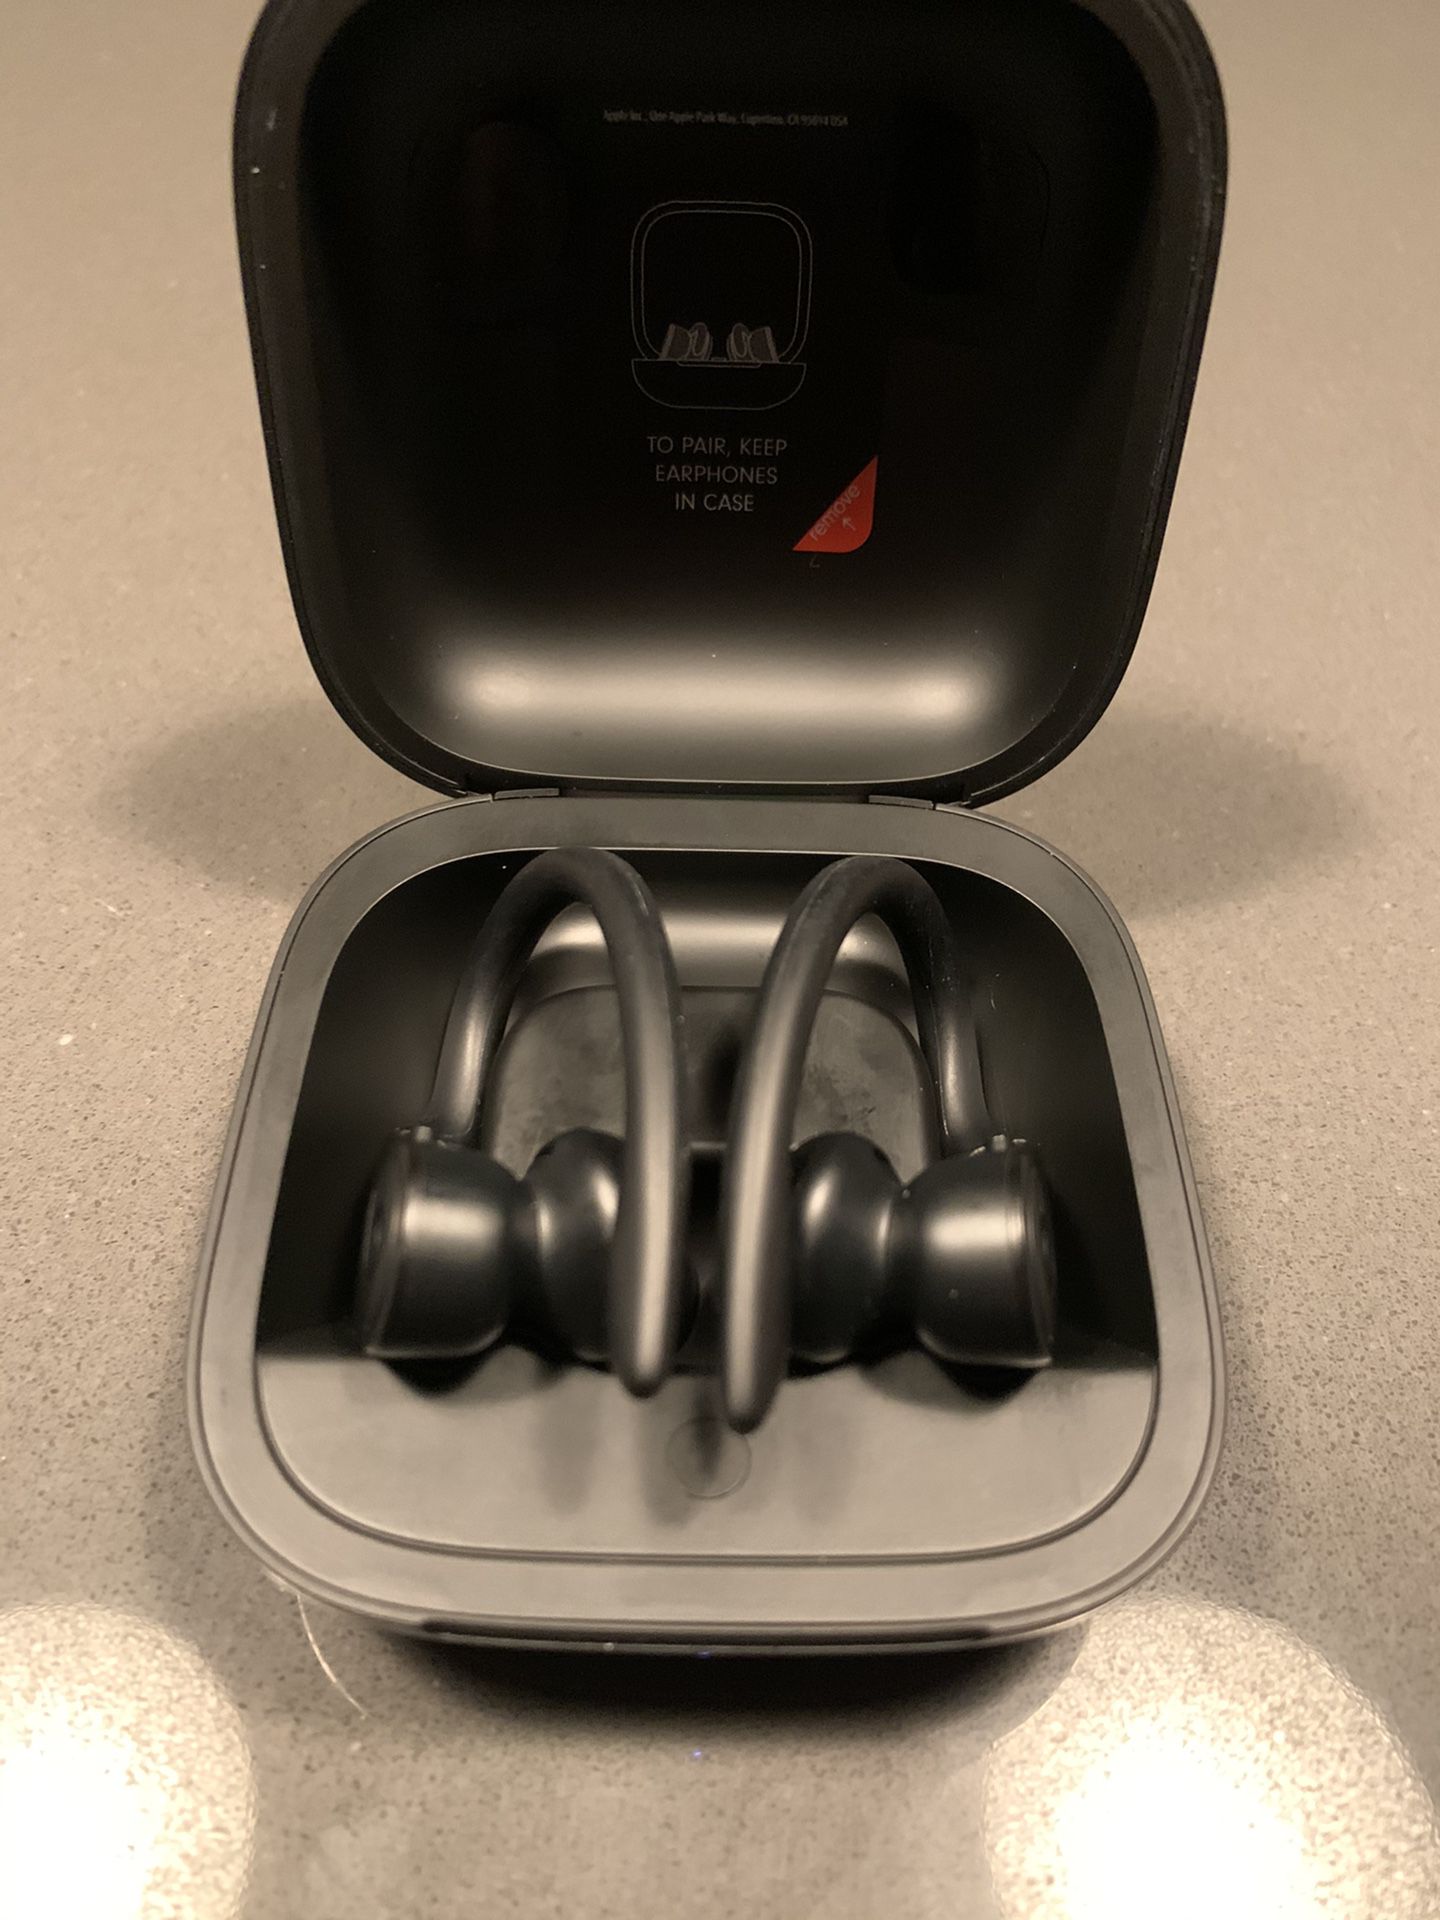 Gently used Powerbeats Pro Bluetooth headphones by Dr. Dre